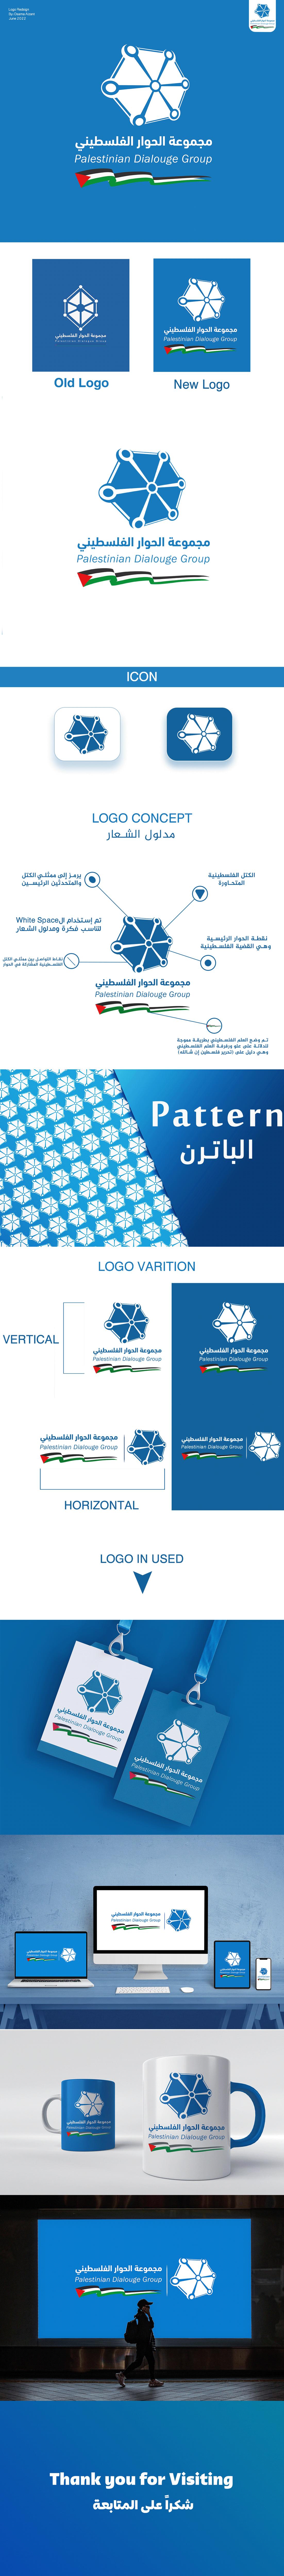 Re- design the logo of the Palestinian Dialogue Group